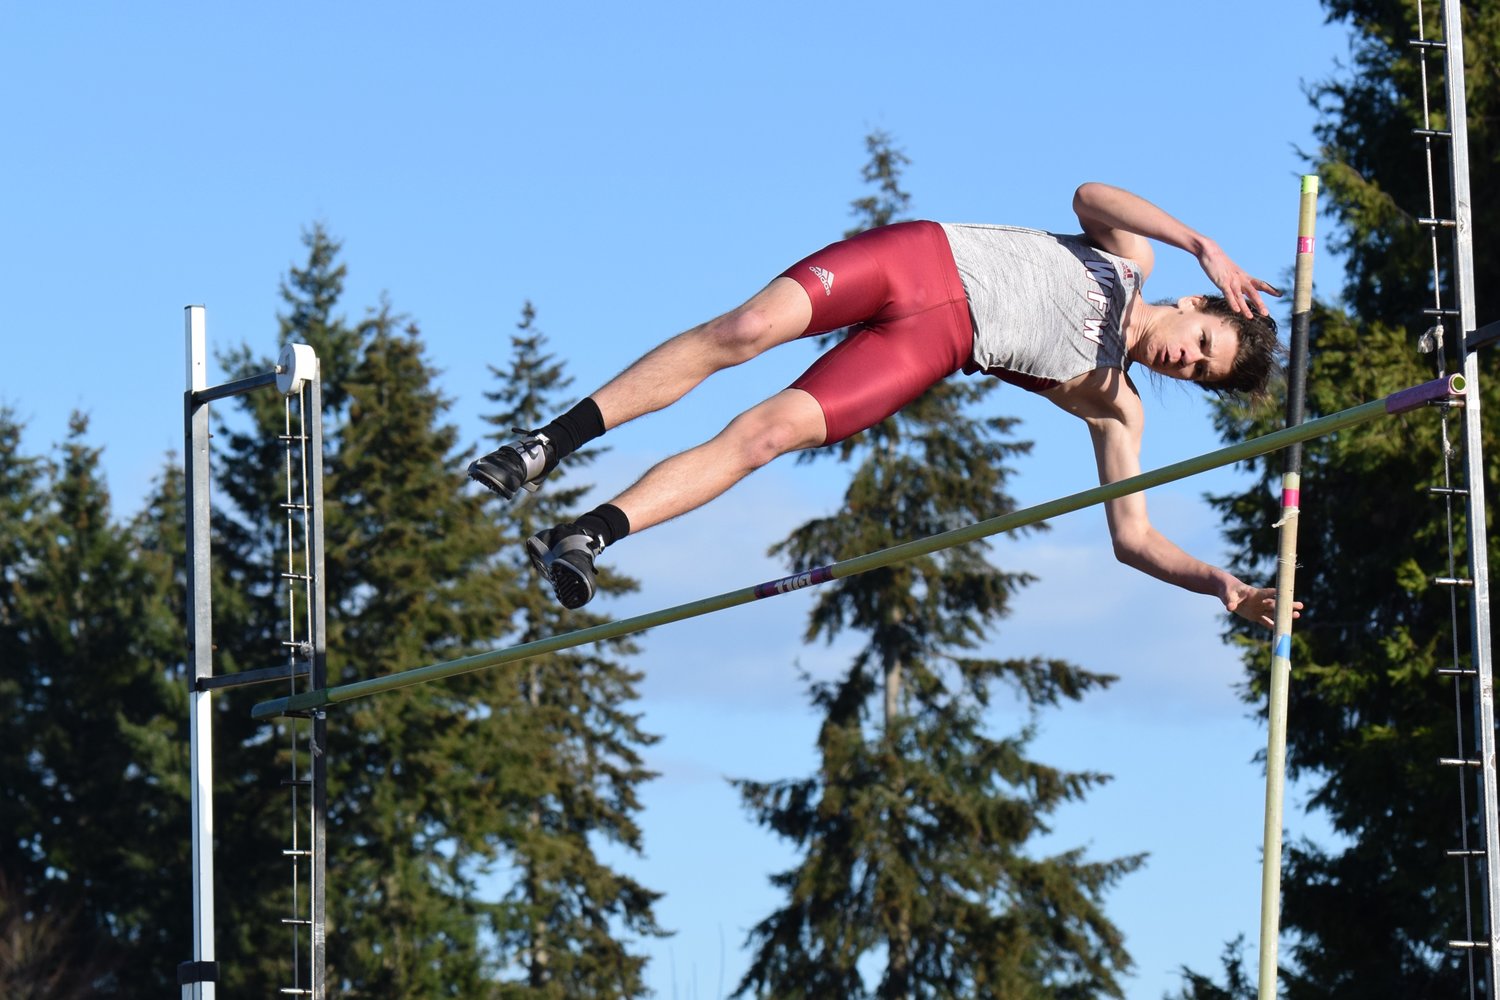 Elijah Annonen gets over the bar during W.F. West's meet at Tumwater on March 21.